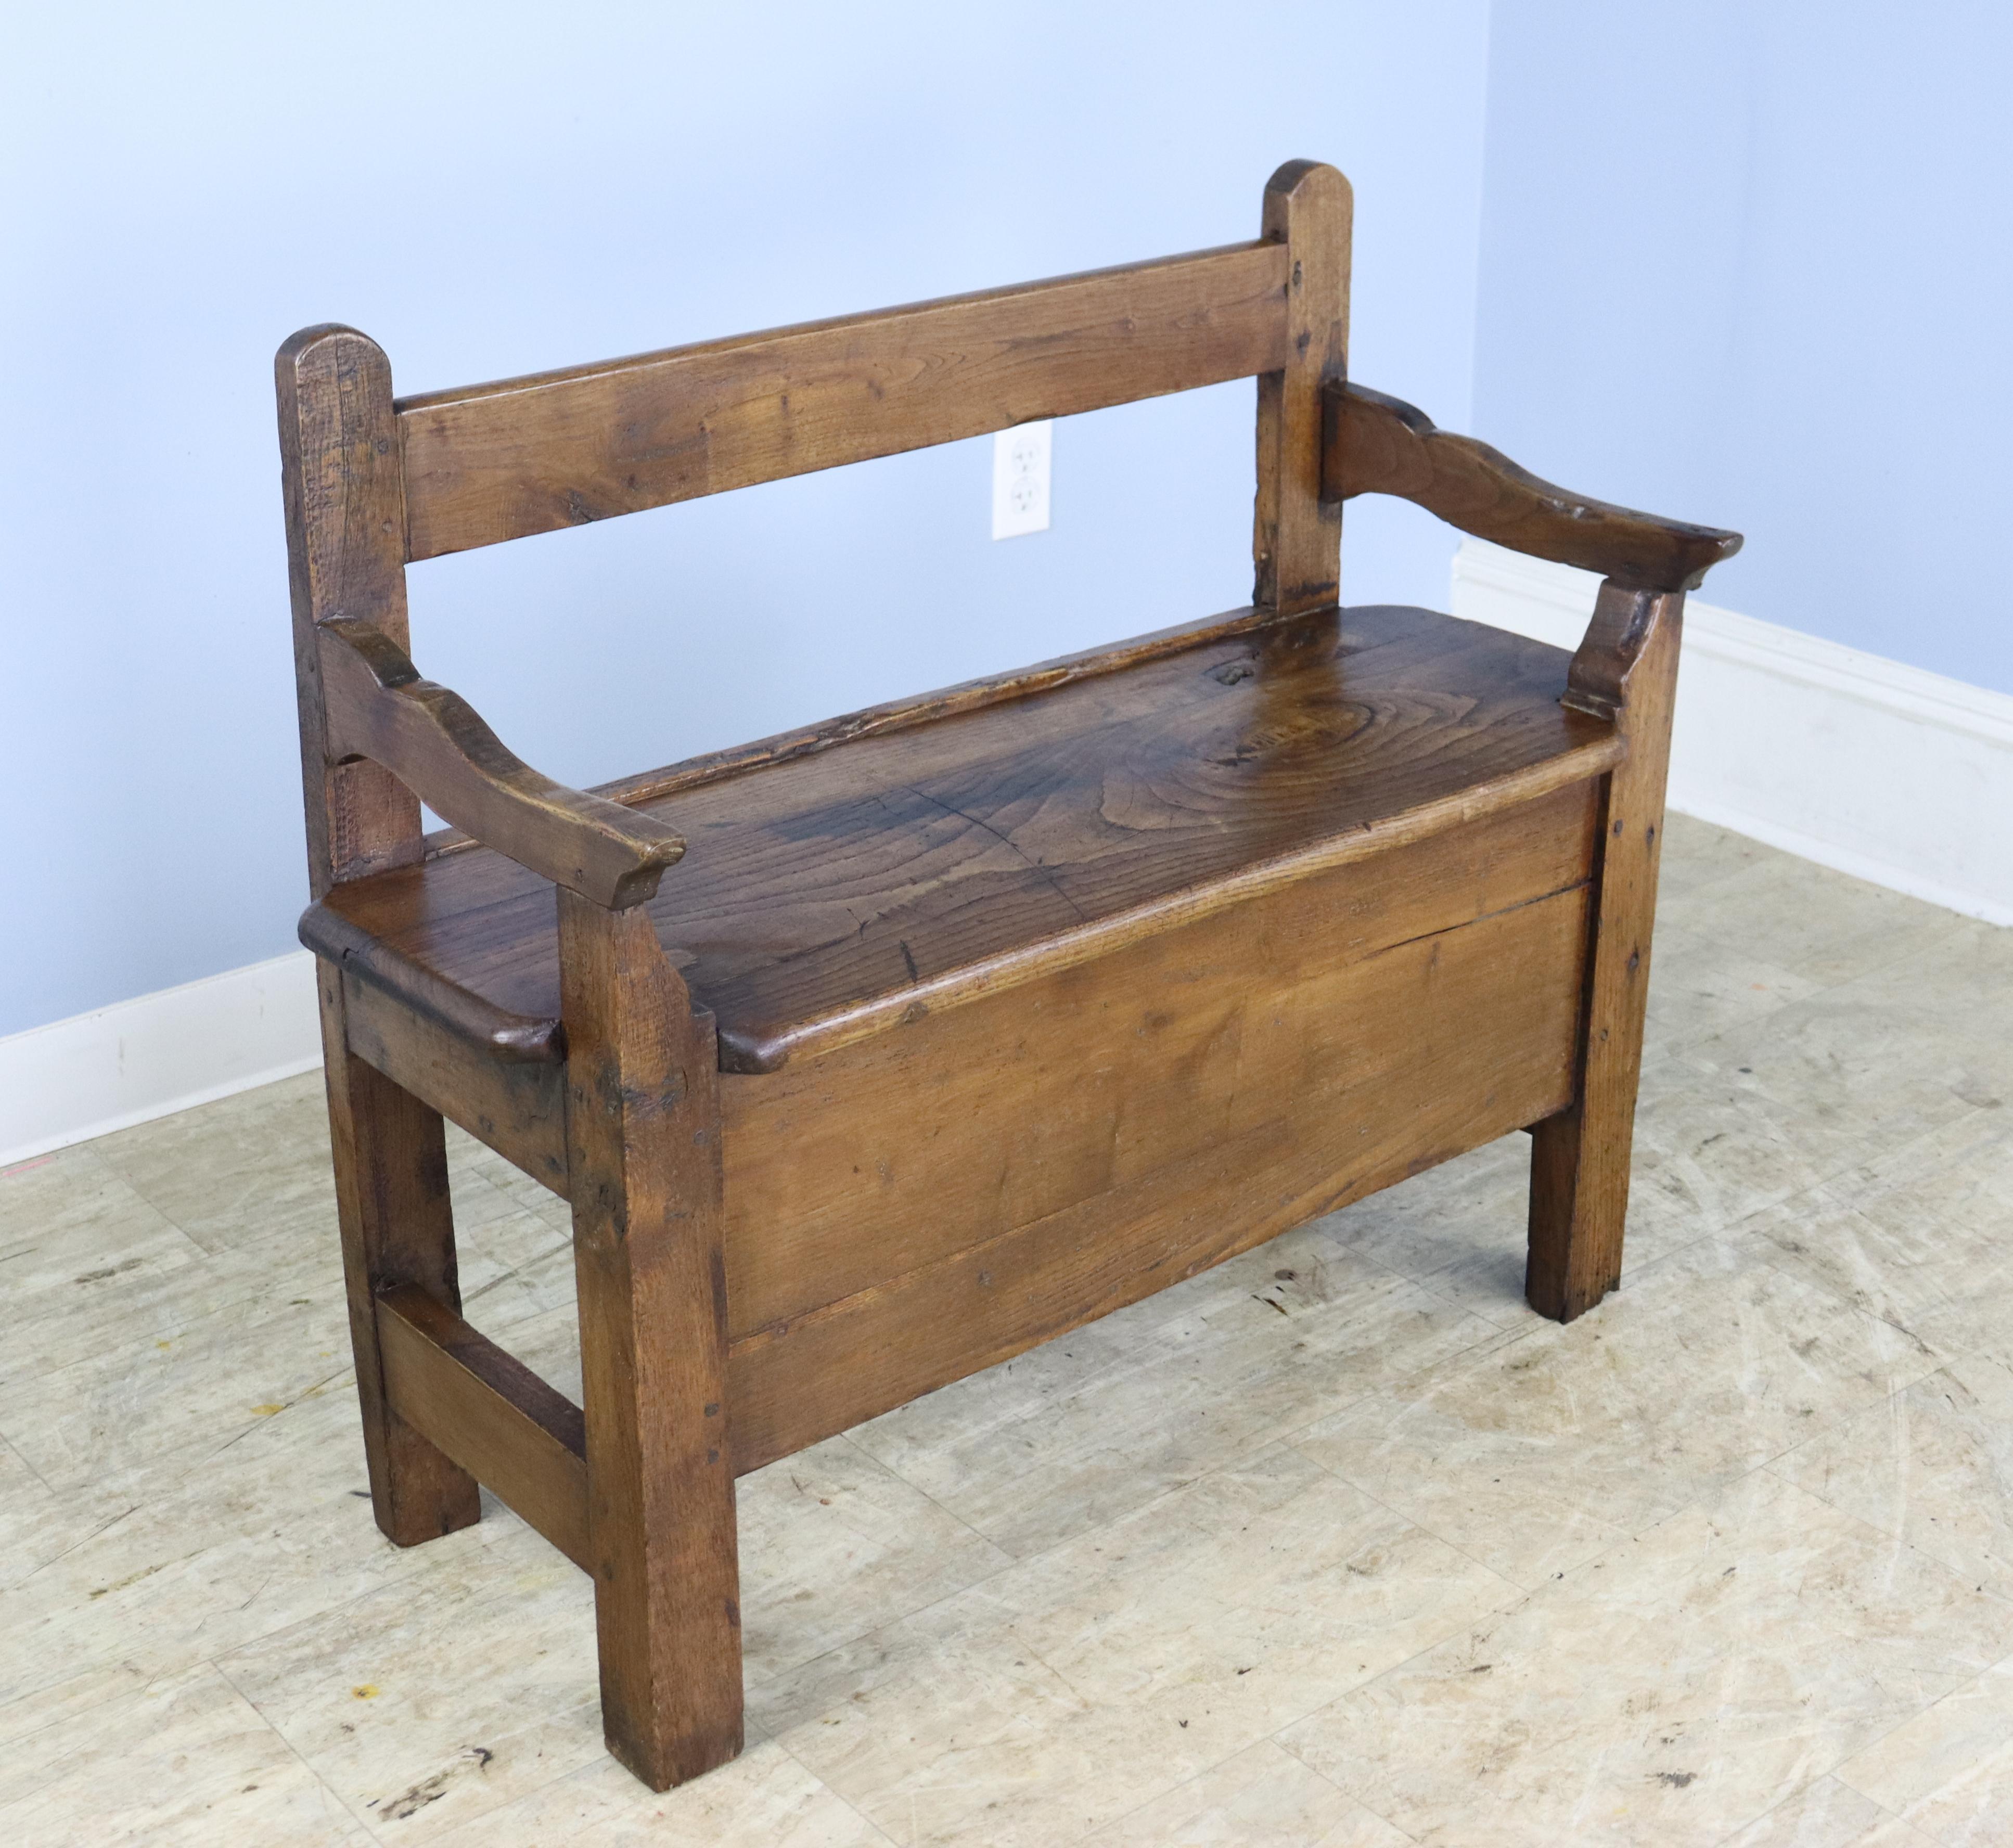 A sweet chestnut bench in glossy chestnut.  Very good grain and patina.  Would be right in the hallway, at the end of a bed, or in the mudroom.  seat does not flip up.